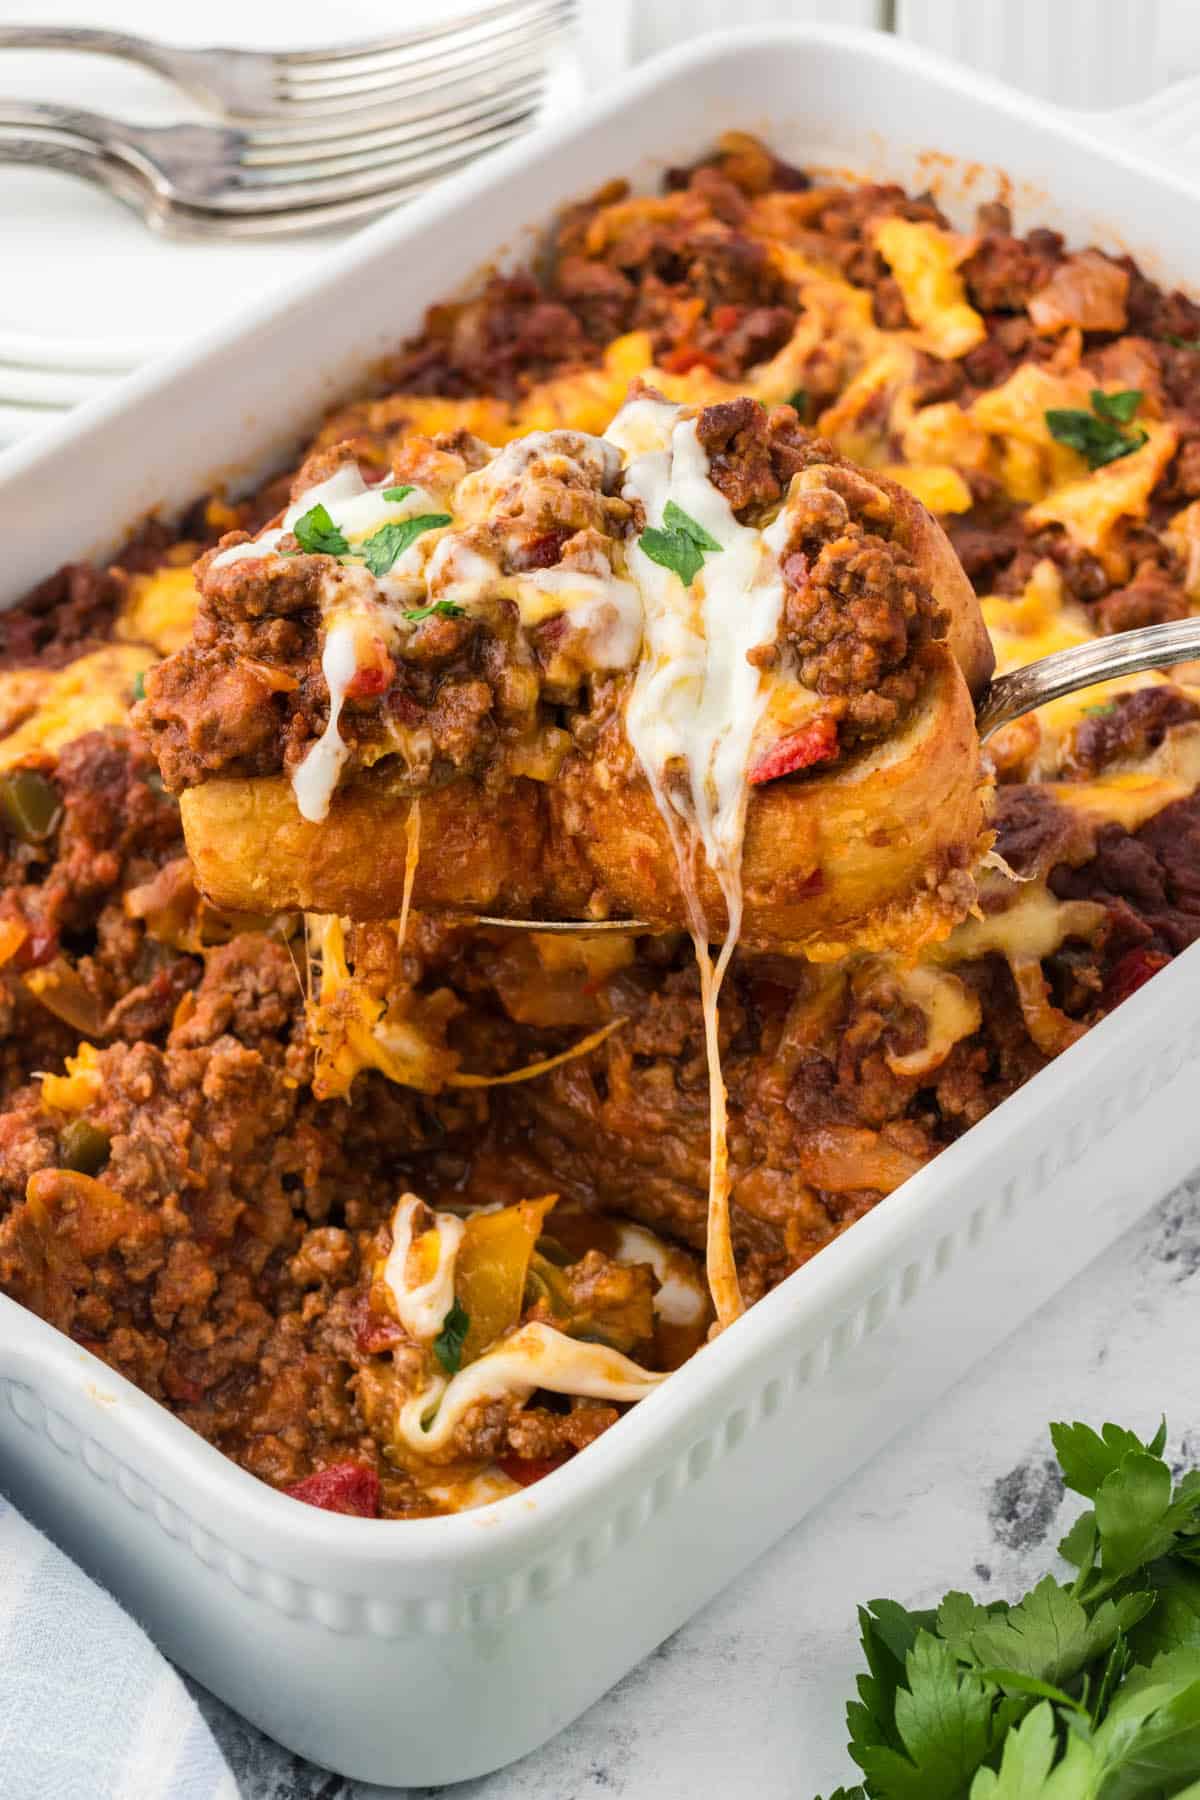 Sloppy Joe Garlic Bread Casserole in a baking dish, with a spatula scooping out a serving.